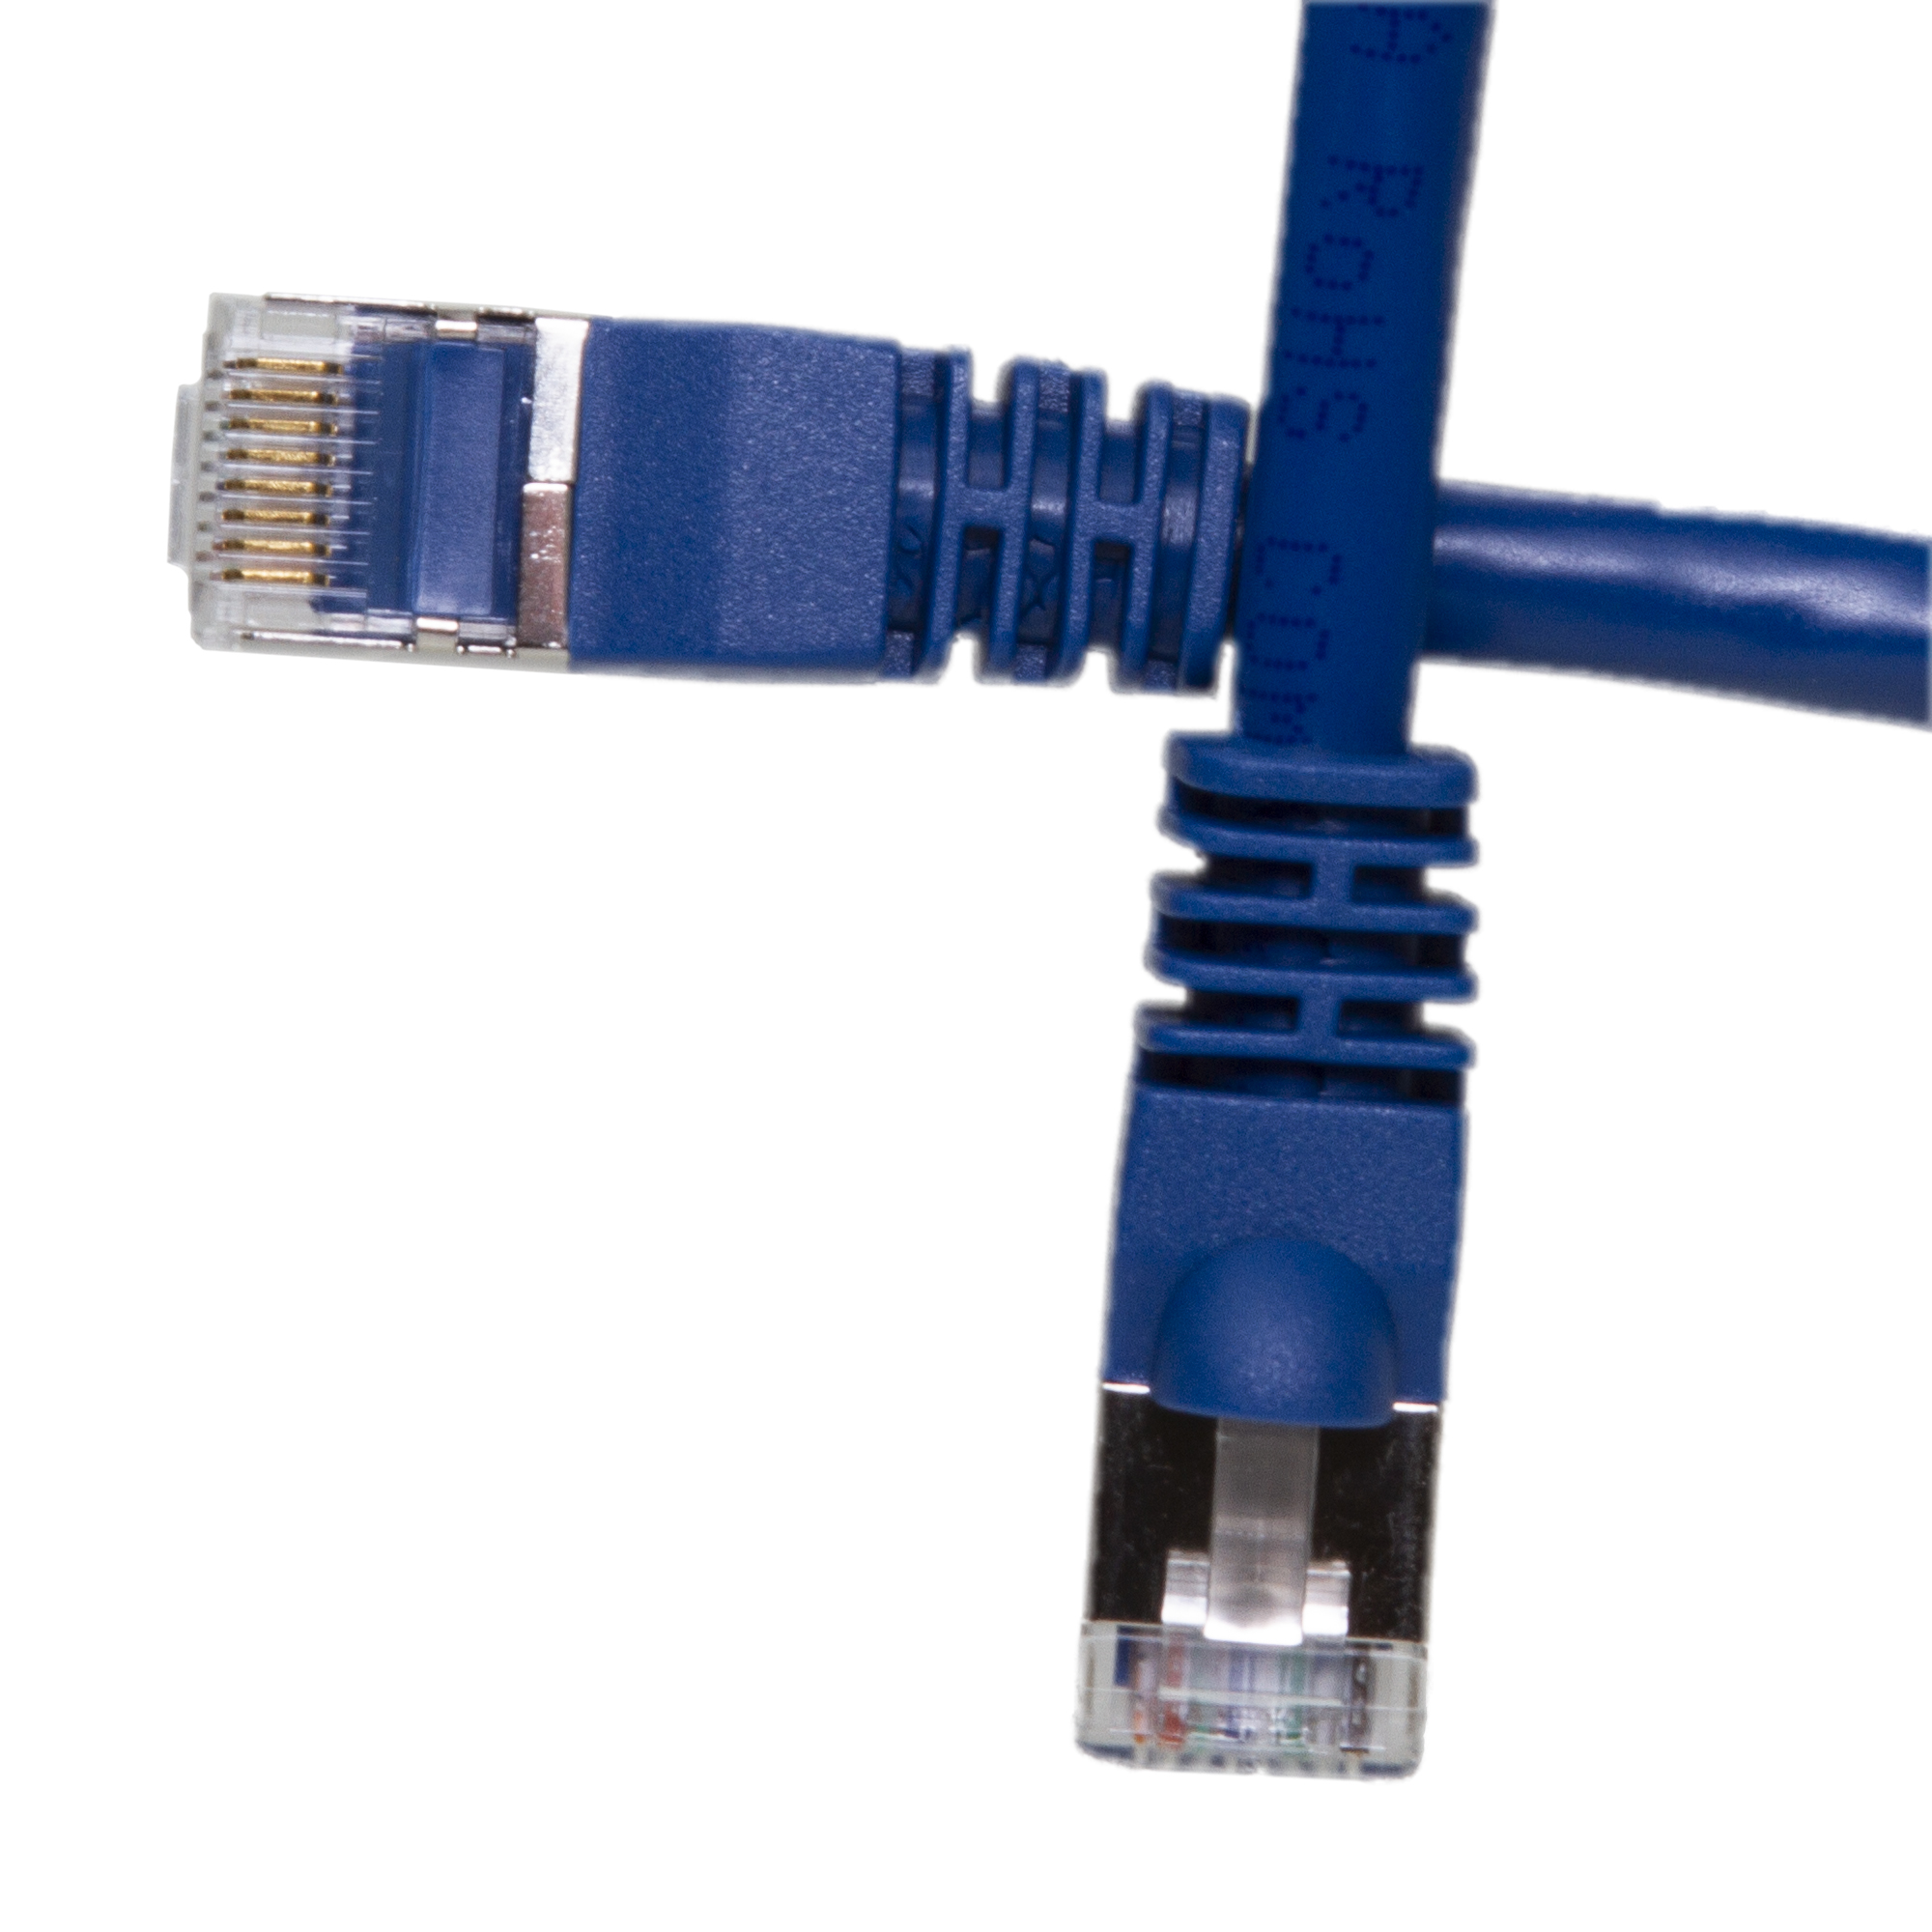 W/BOOT 25FT CAT6A BLUE STP PATCH CABLE 